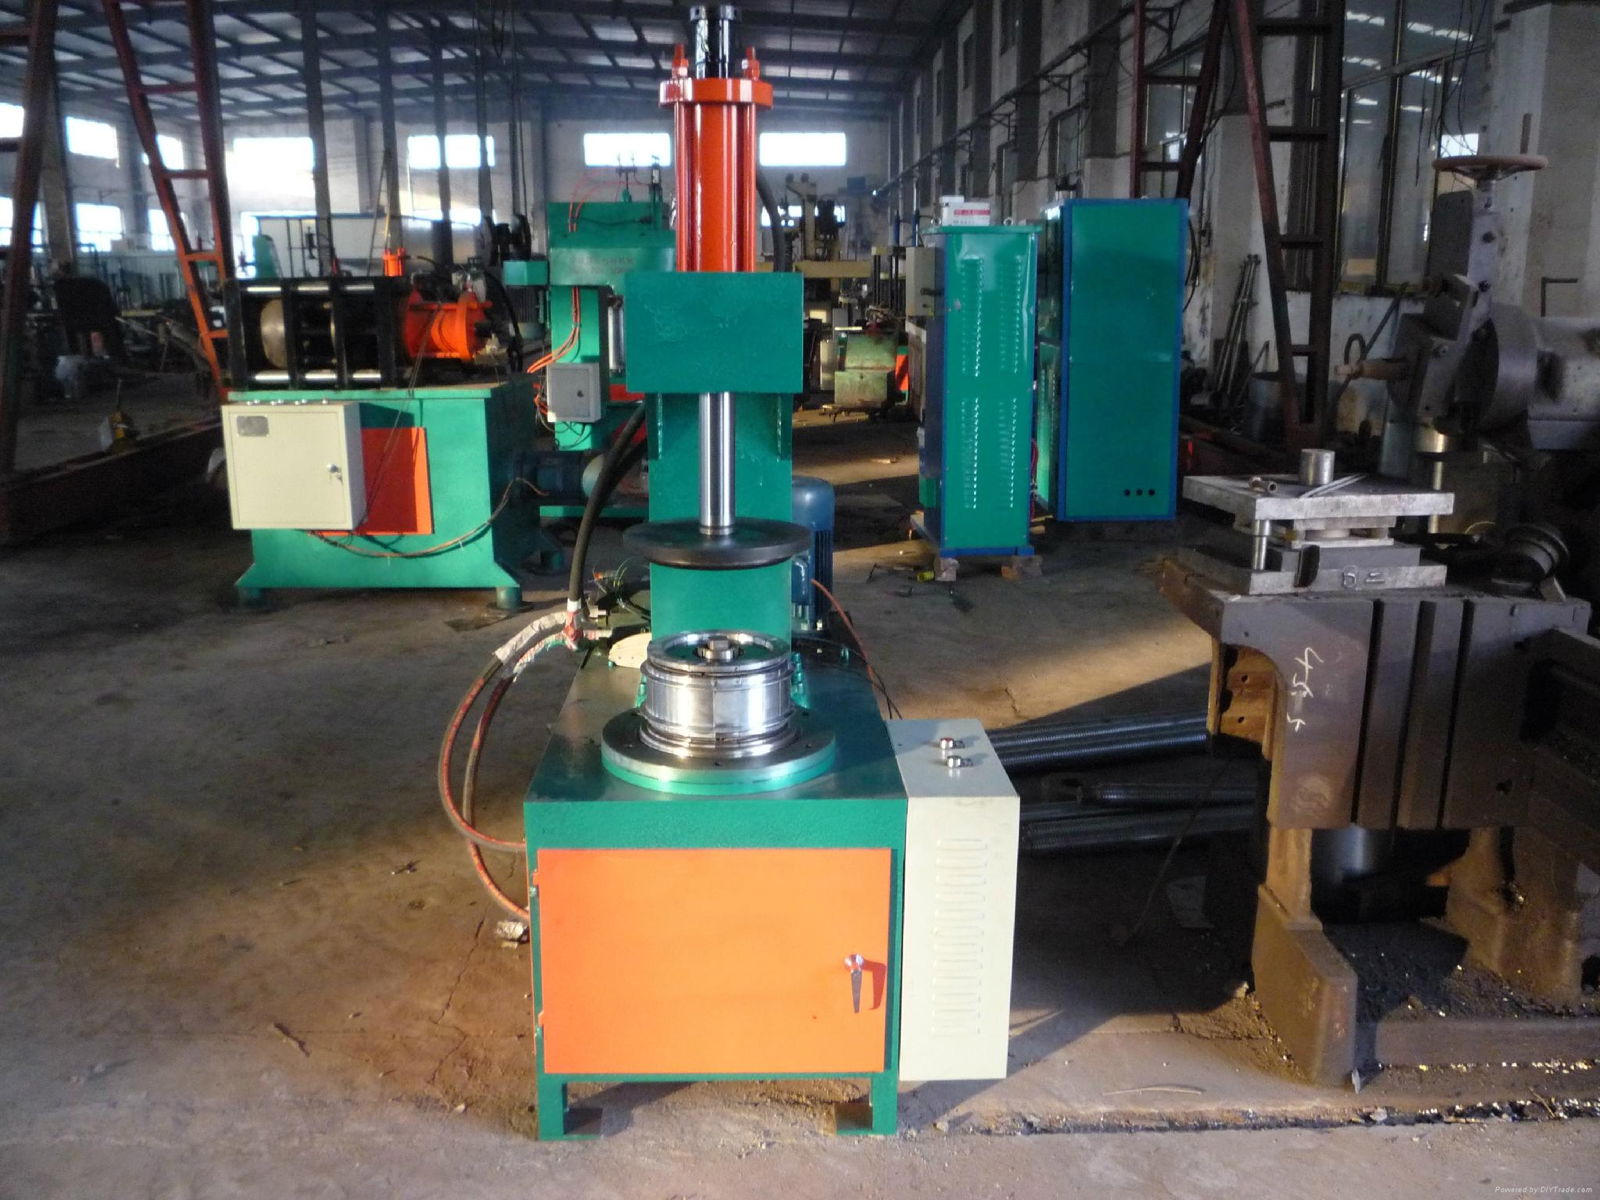 Supply fan flanging equipment 5